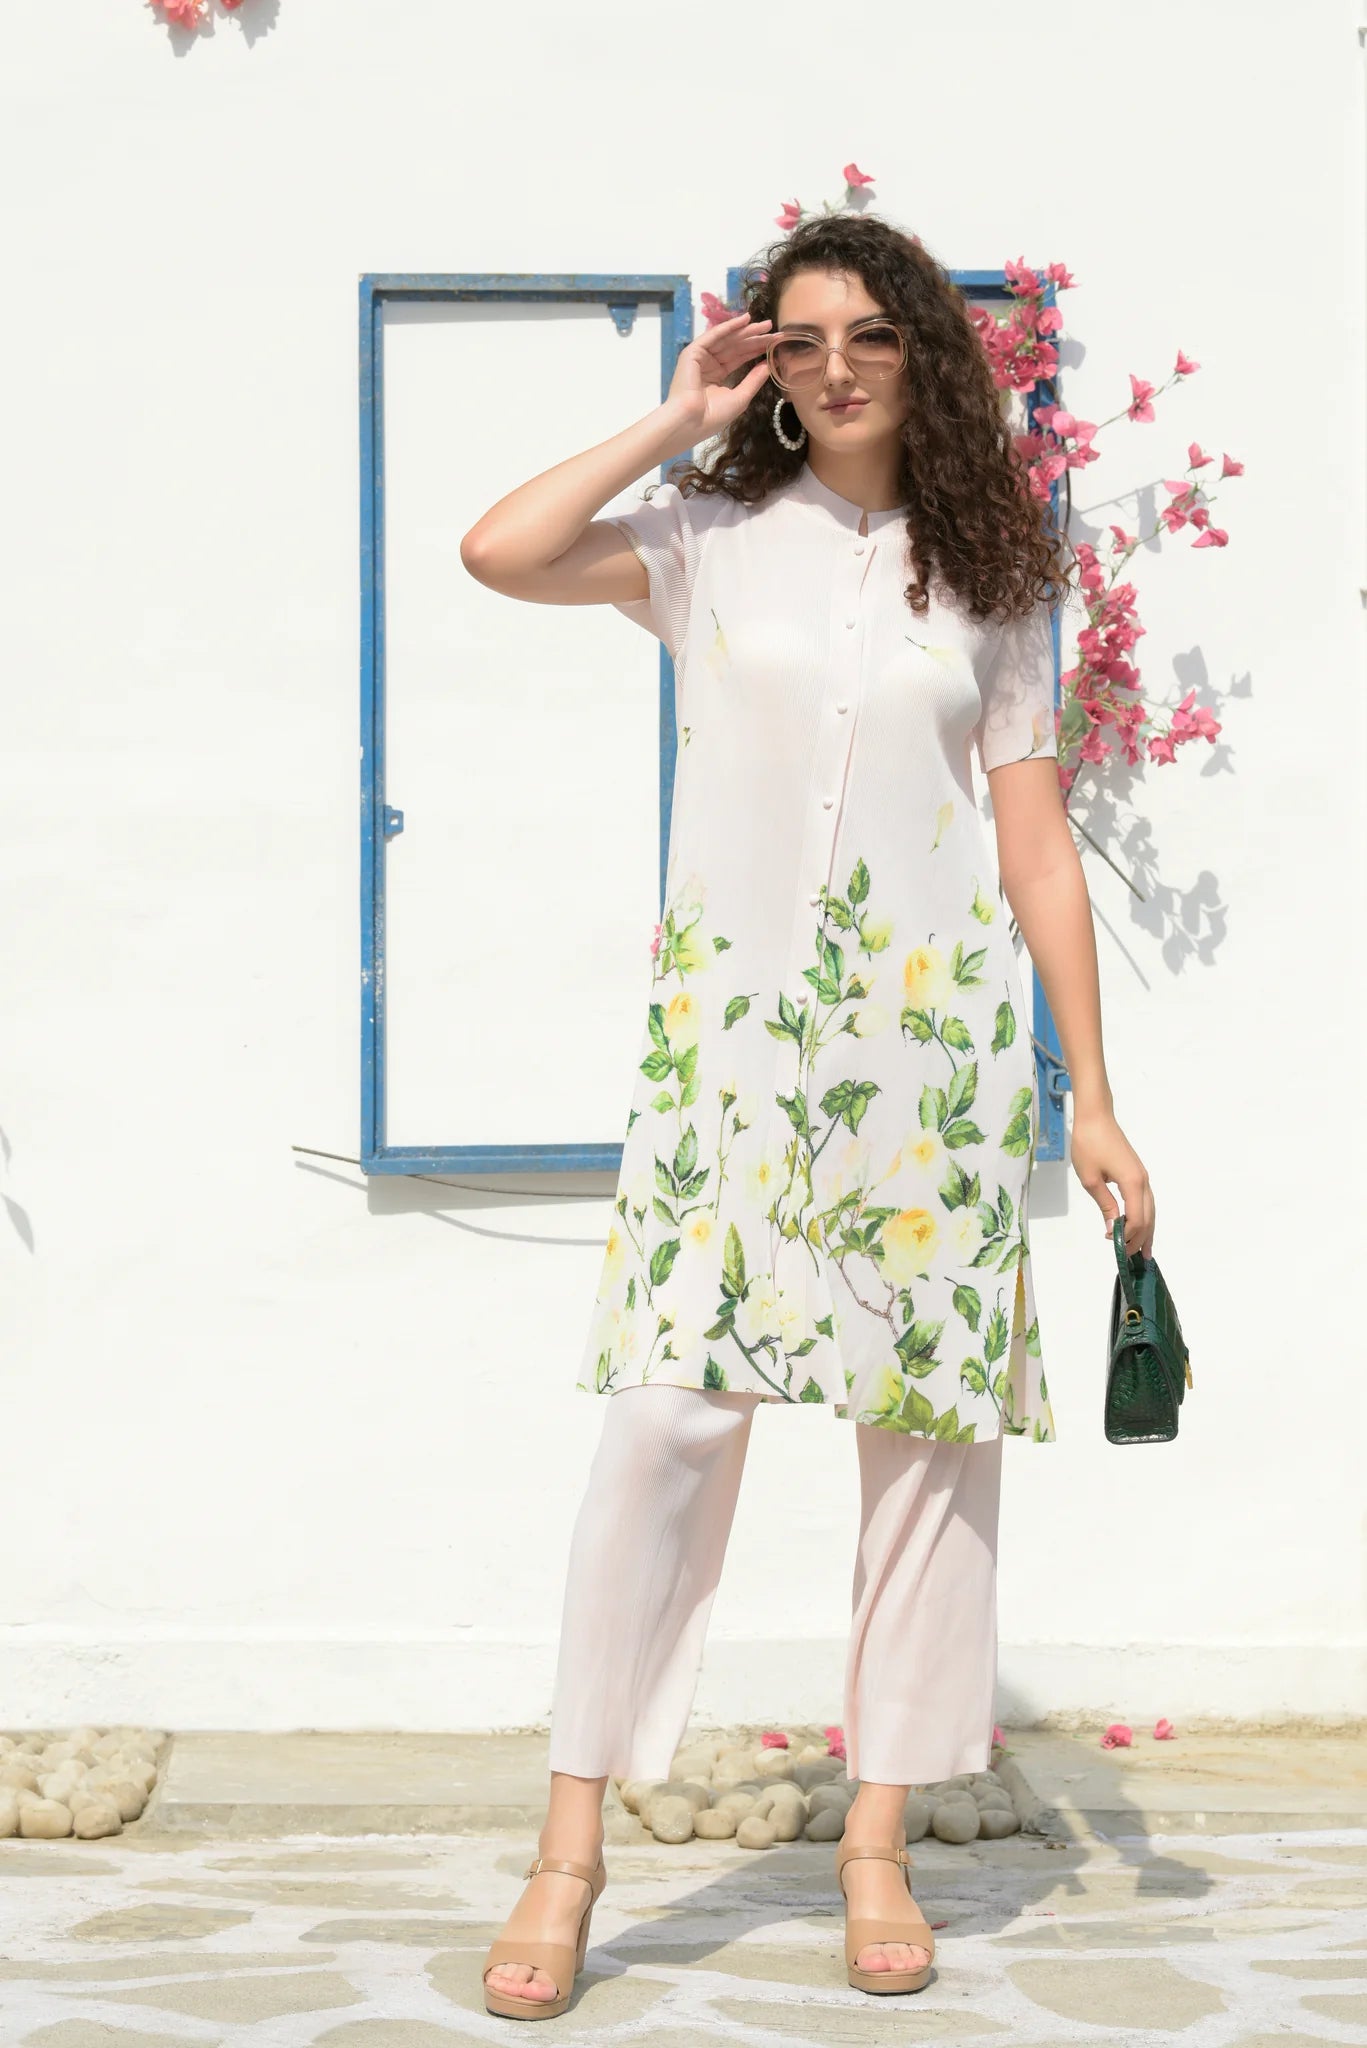 Image of The Fable Floral Tunic Set is designed with the highest quality craftsmanship to bring timeless elegance to your wardrobe. Crafted from rayon fabric, this set ensures breathability and comfort for all-day wear. It features a round neckline, short sleeve cut, and a flattering silhouette that suits all body types. Get ready to look and feel your best with the Fable Floral Tunic Set.  From savoirfashions.com